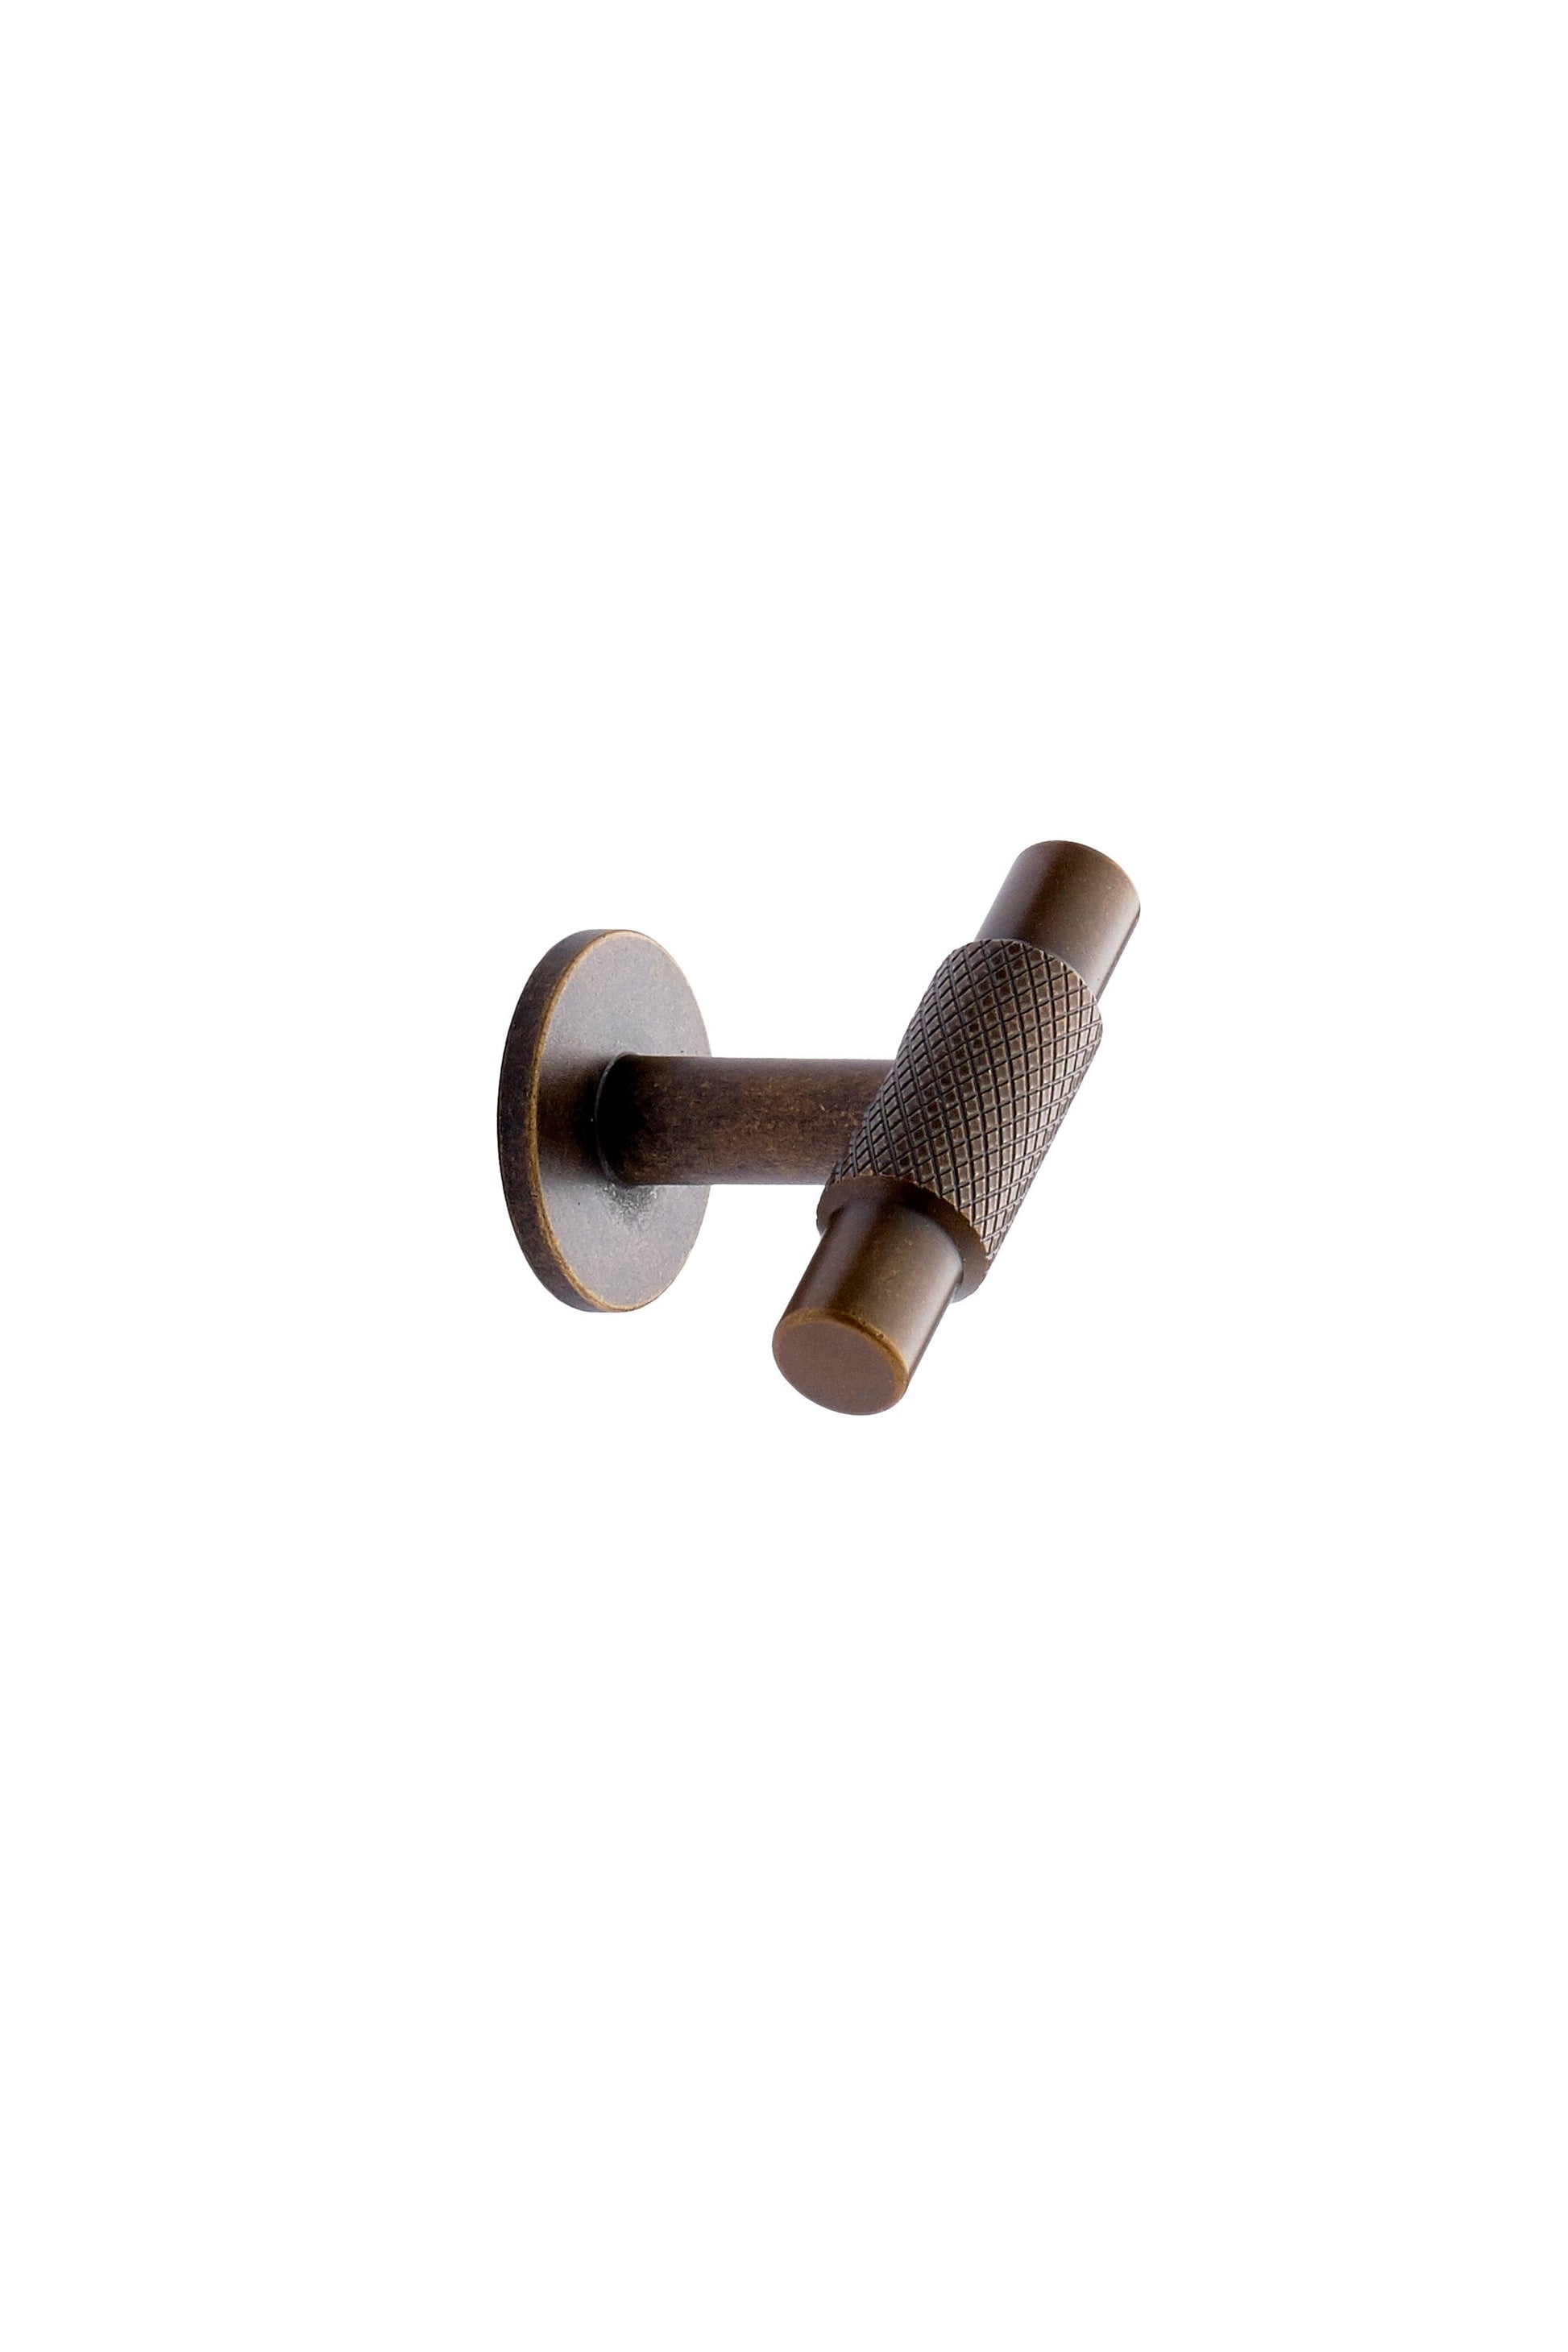 Furnipart Manor Knurled Handles & Knobs Antique Brass